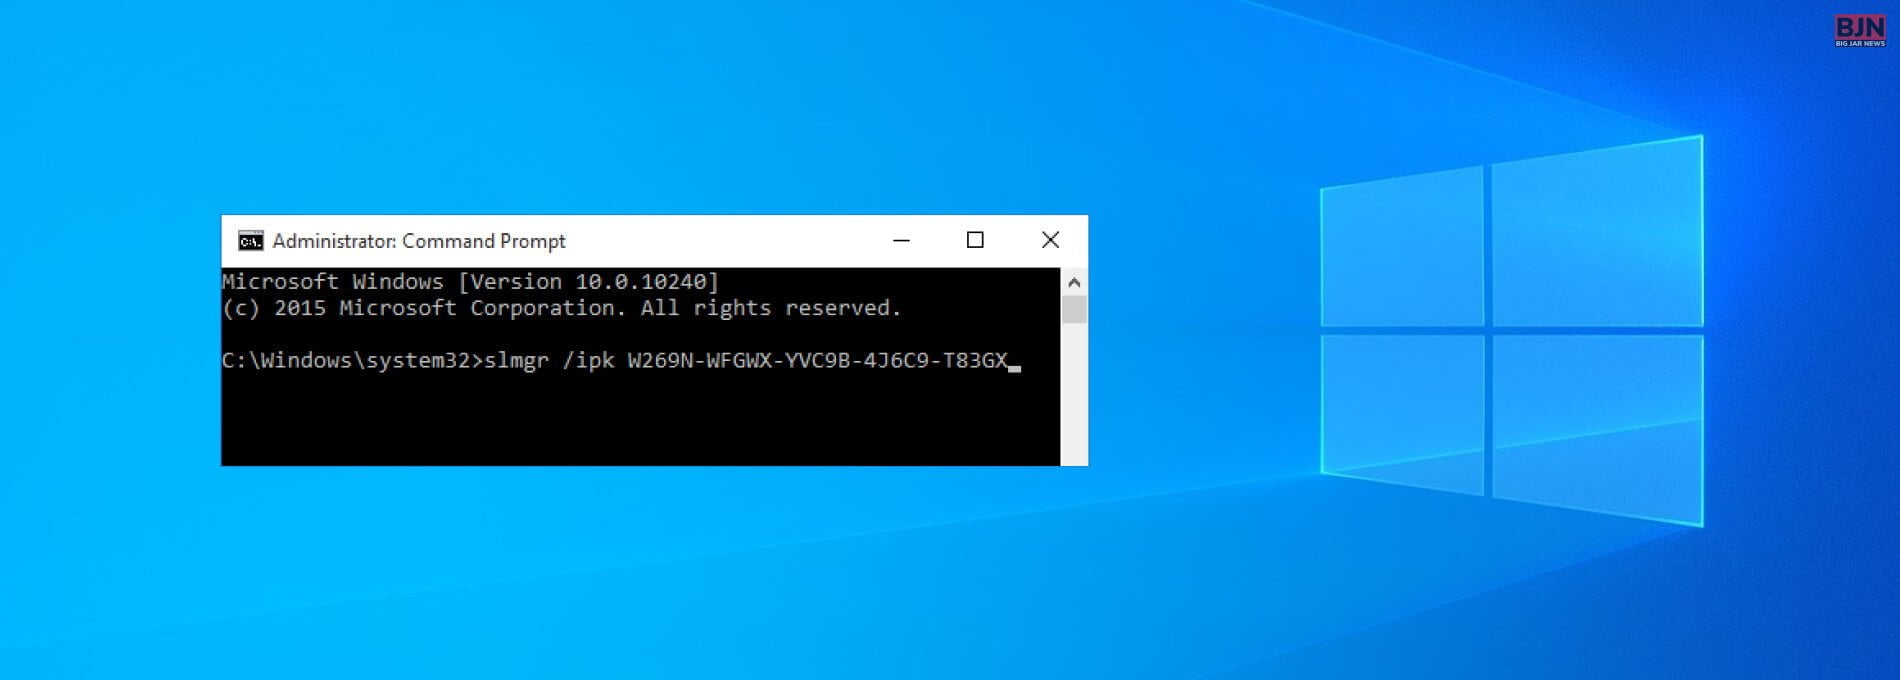 How To Activate Windows 10 Using Cmd Step By Step Guide 6604